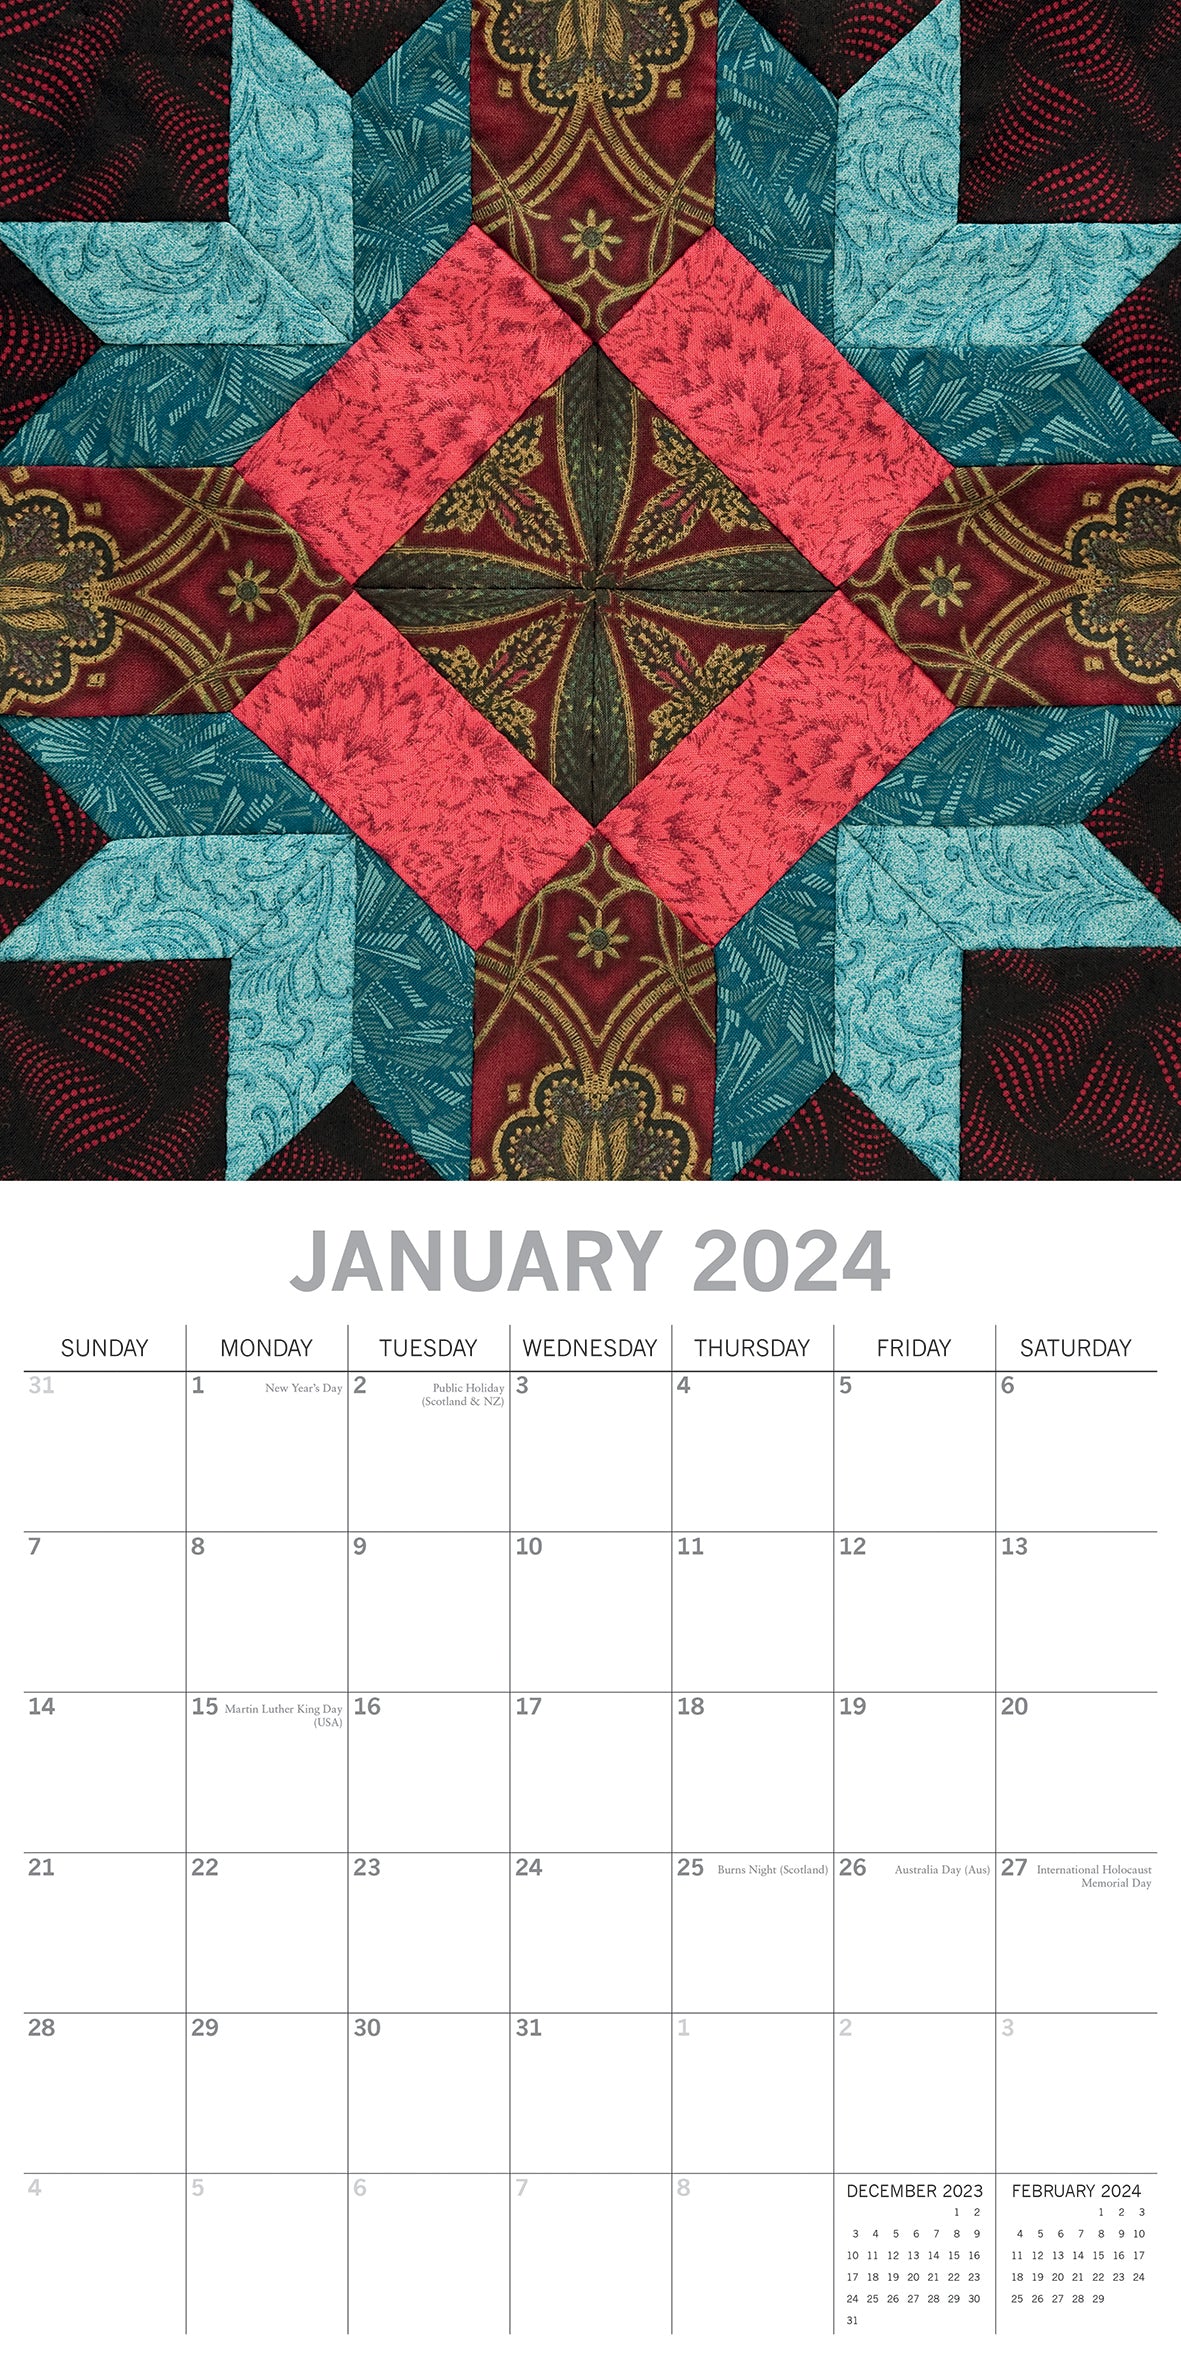 Quilting - 2024 Square Wall Calendar 16 Months Lifestyle Planner New Year Gift